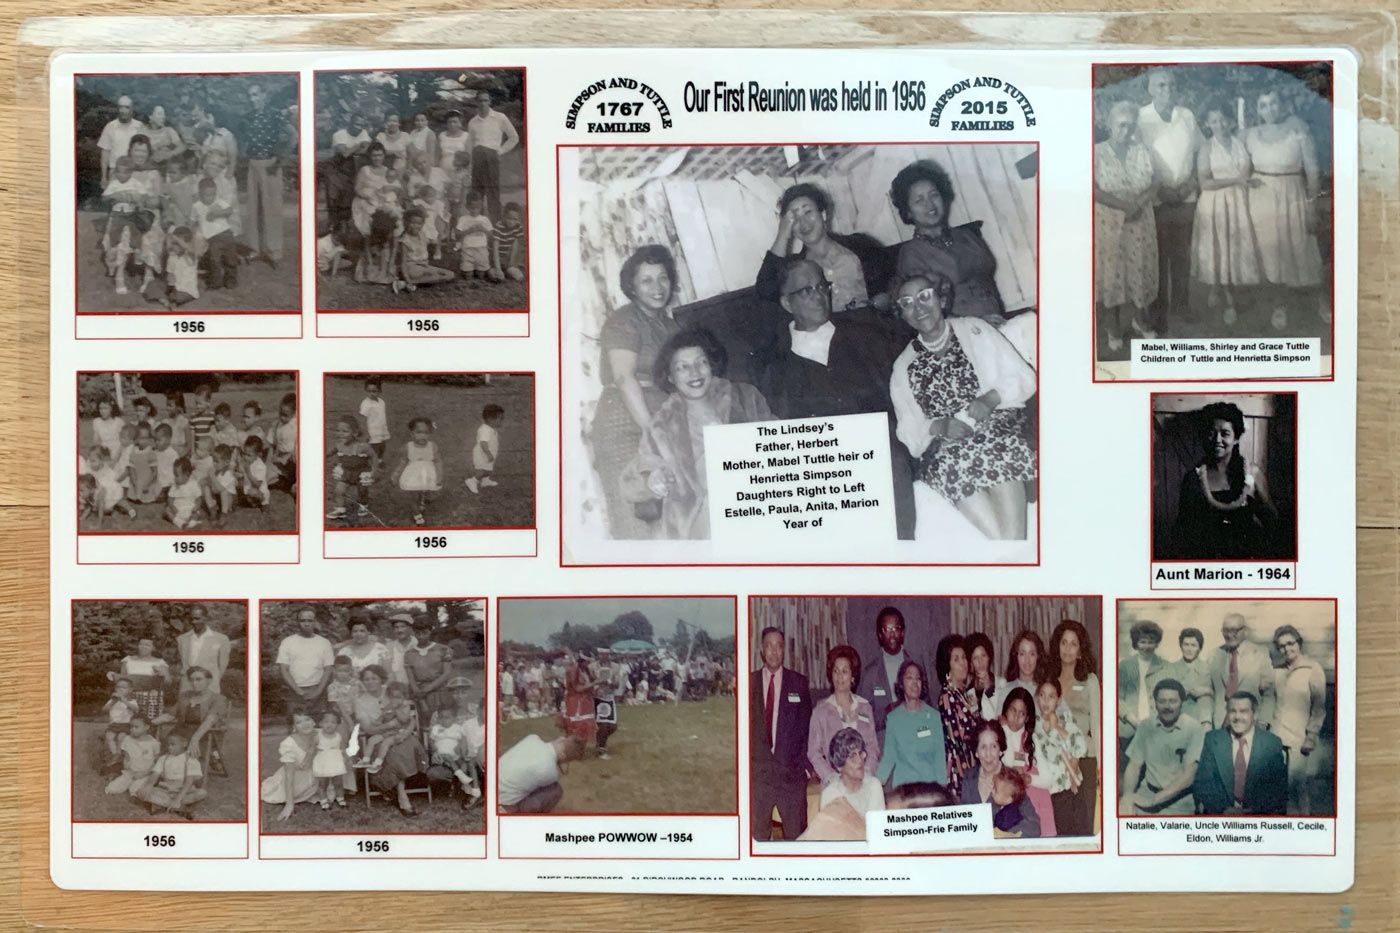 Collage of images from Tuttle family reunions